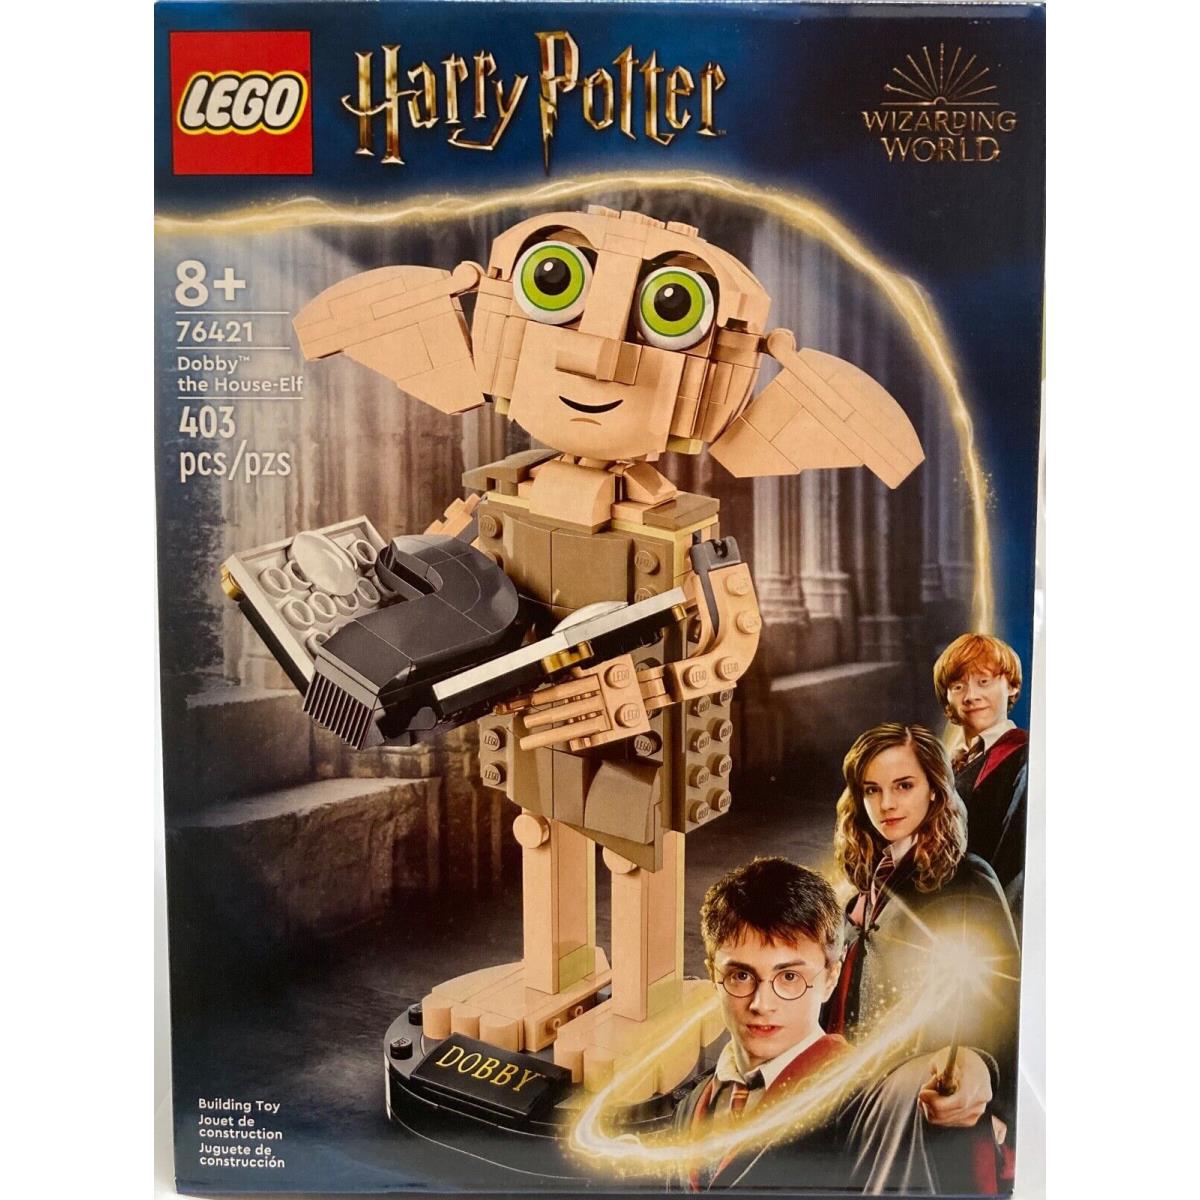 Lego Harry Potter 75421 Dobby The House Elf Building Set Toy 403 Pieces 8+